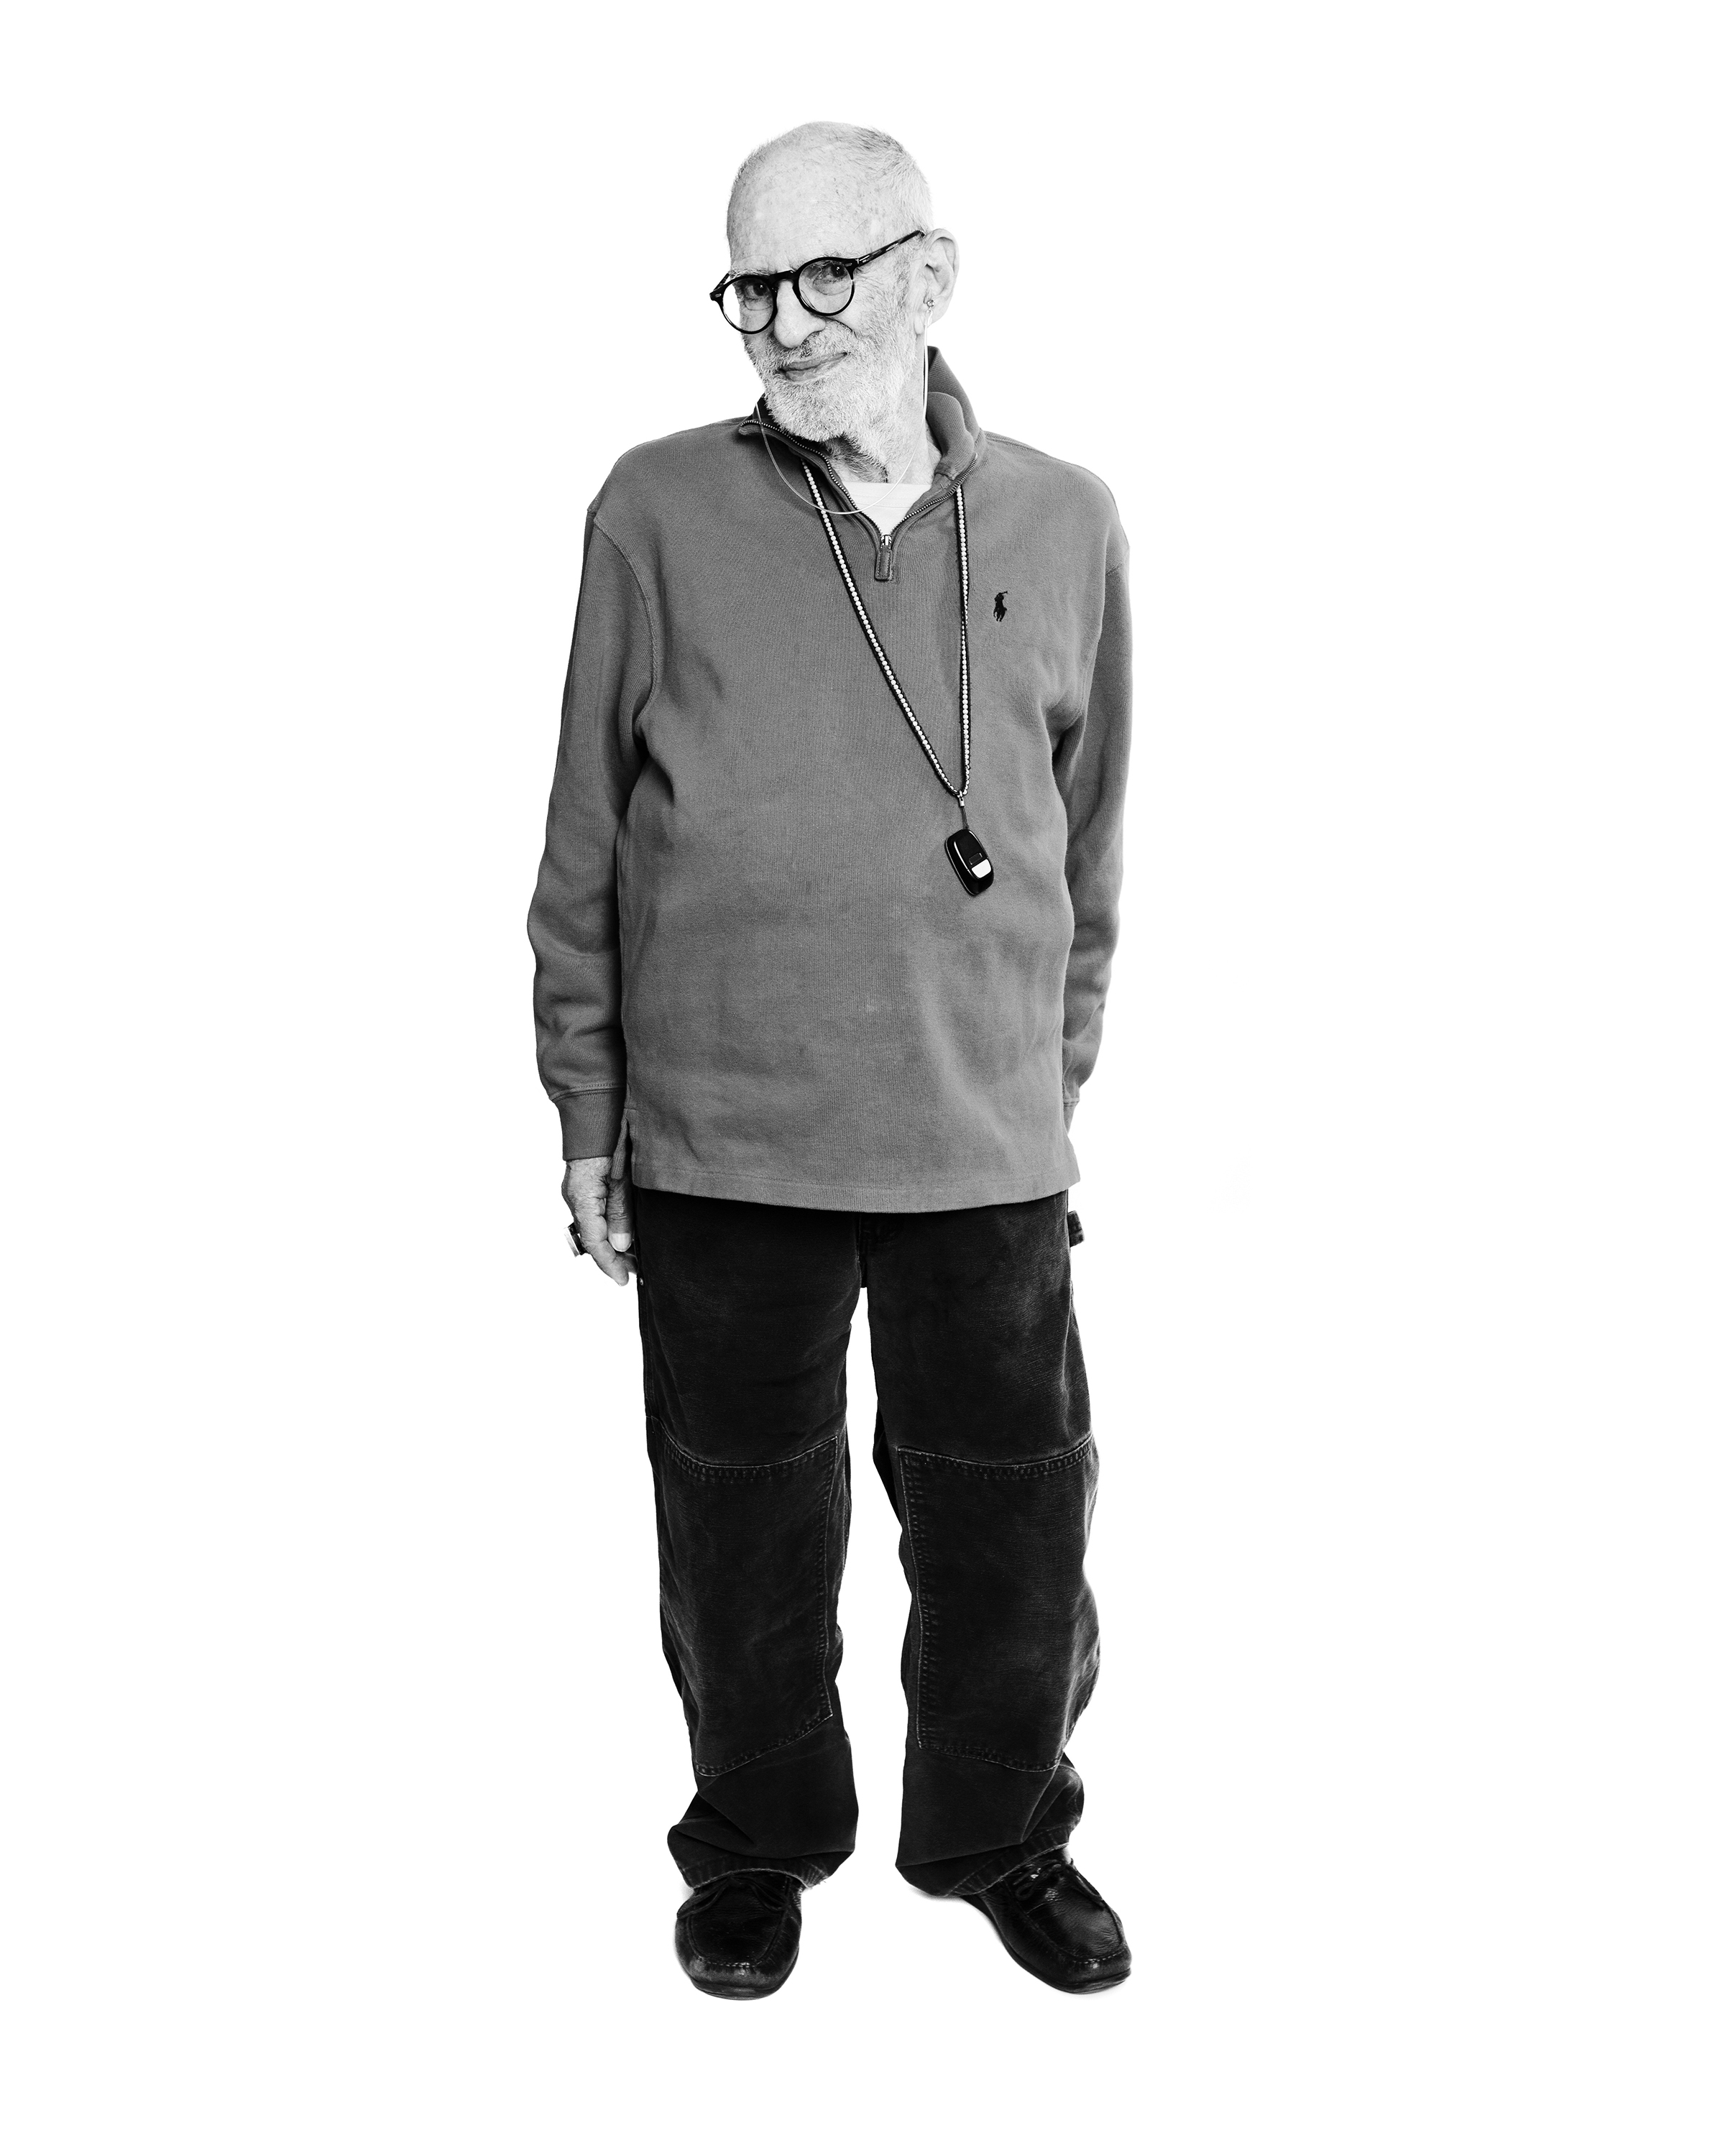 Larry Kramer photographed at his home in NYC. (Ryan Pfluger for TIME)